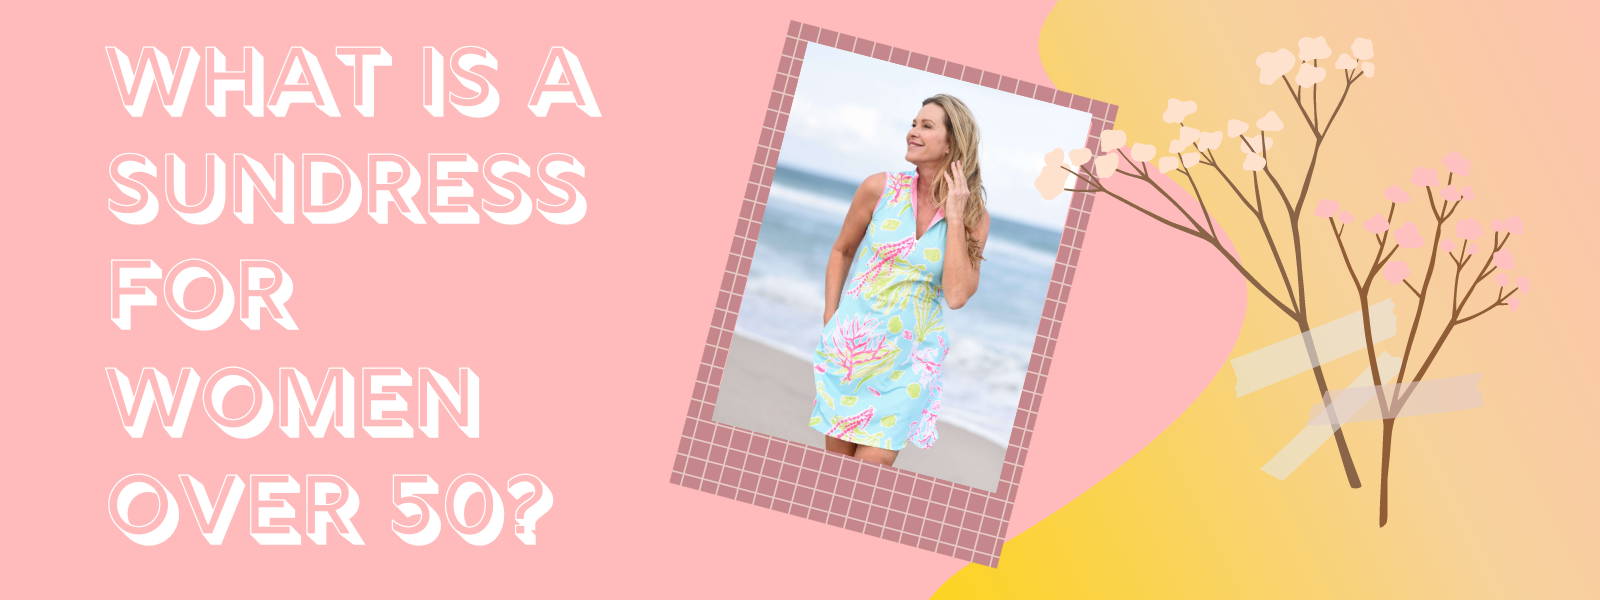 What is a Sundress for Women Over 50?